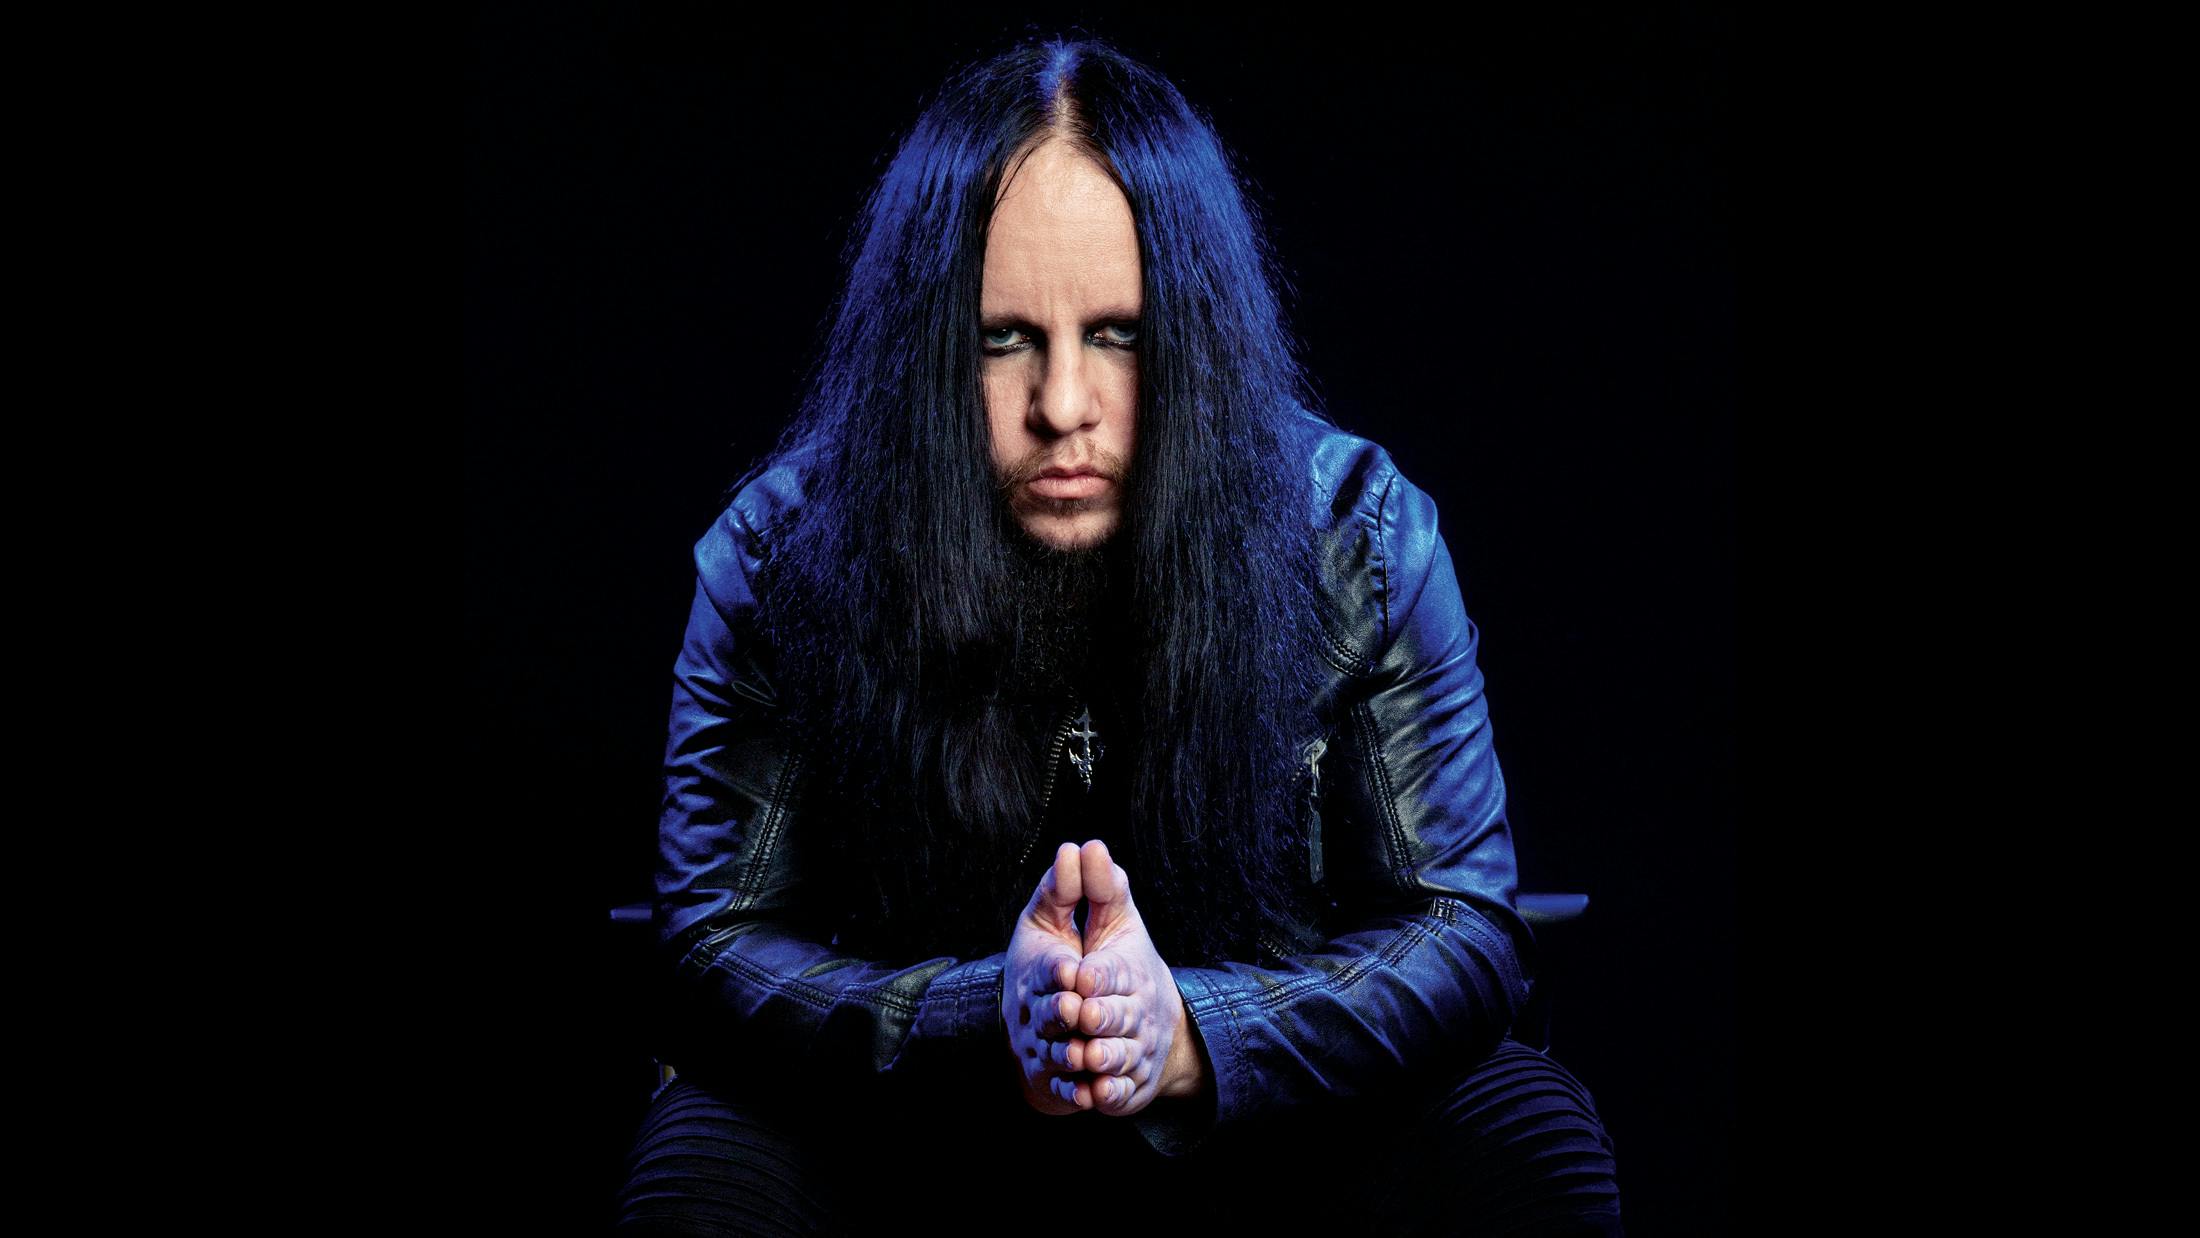 7 things you probably didn't know about Joey Jordison